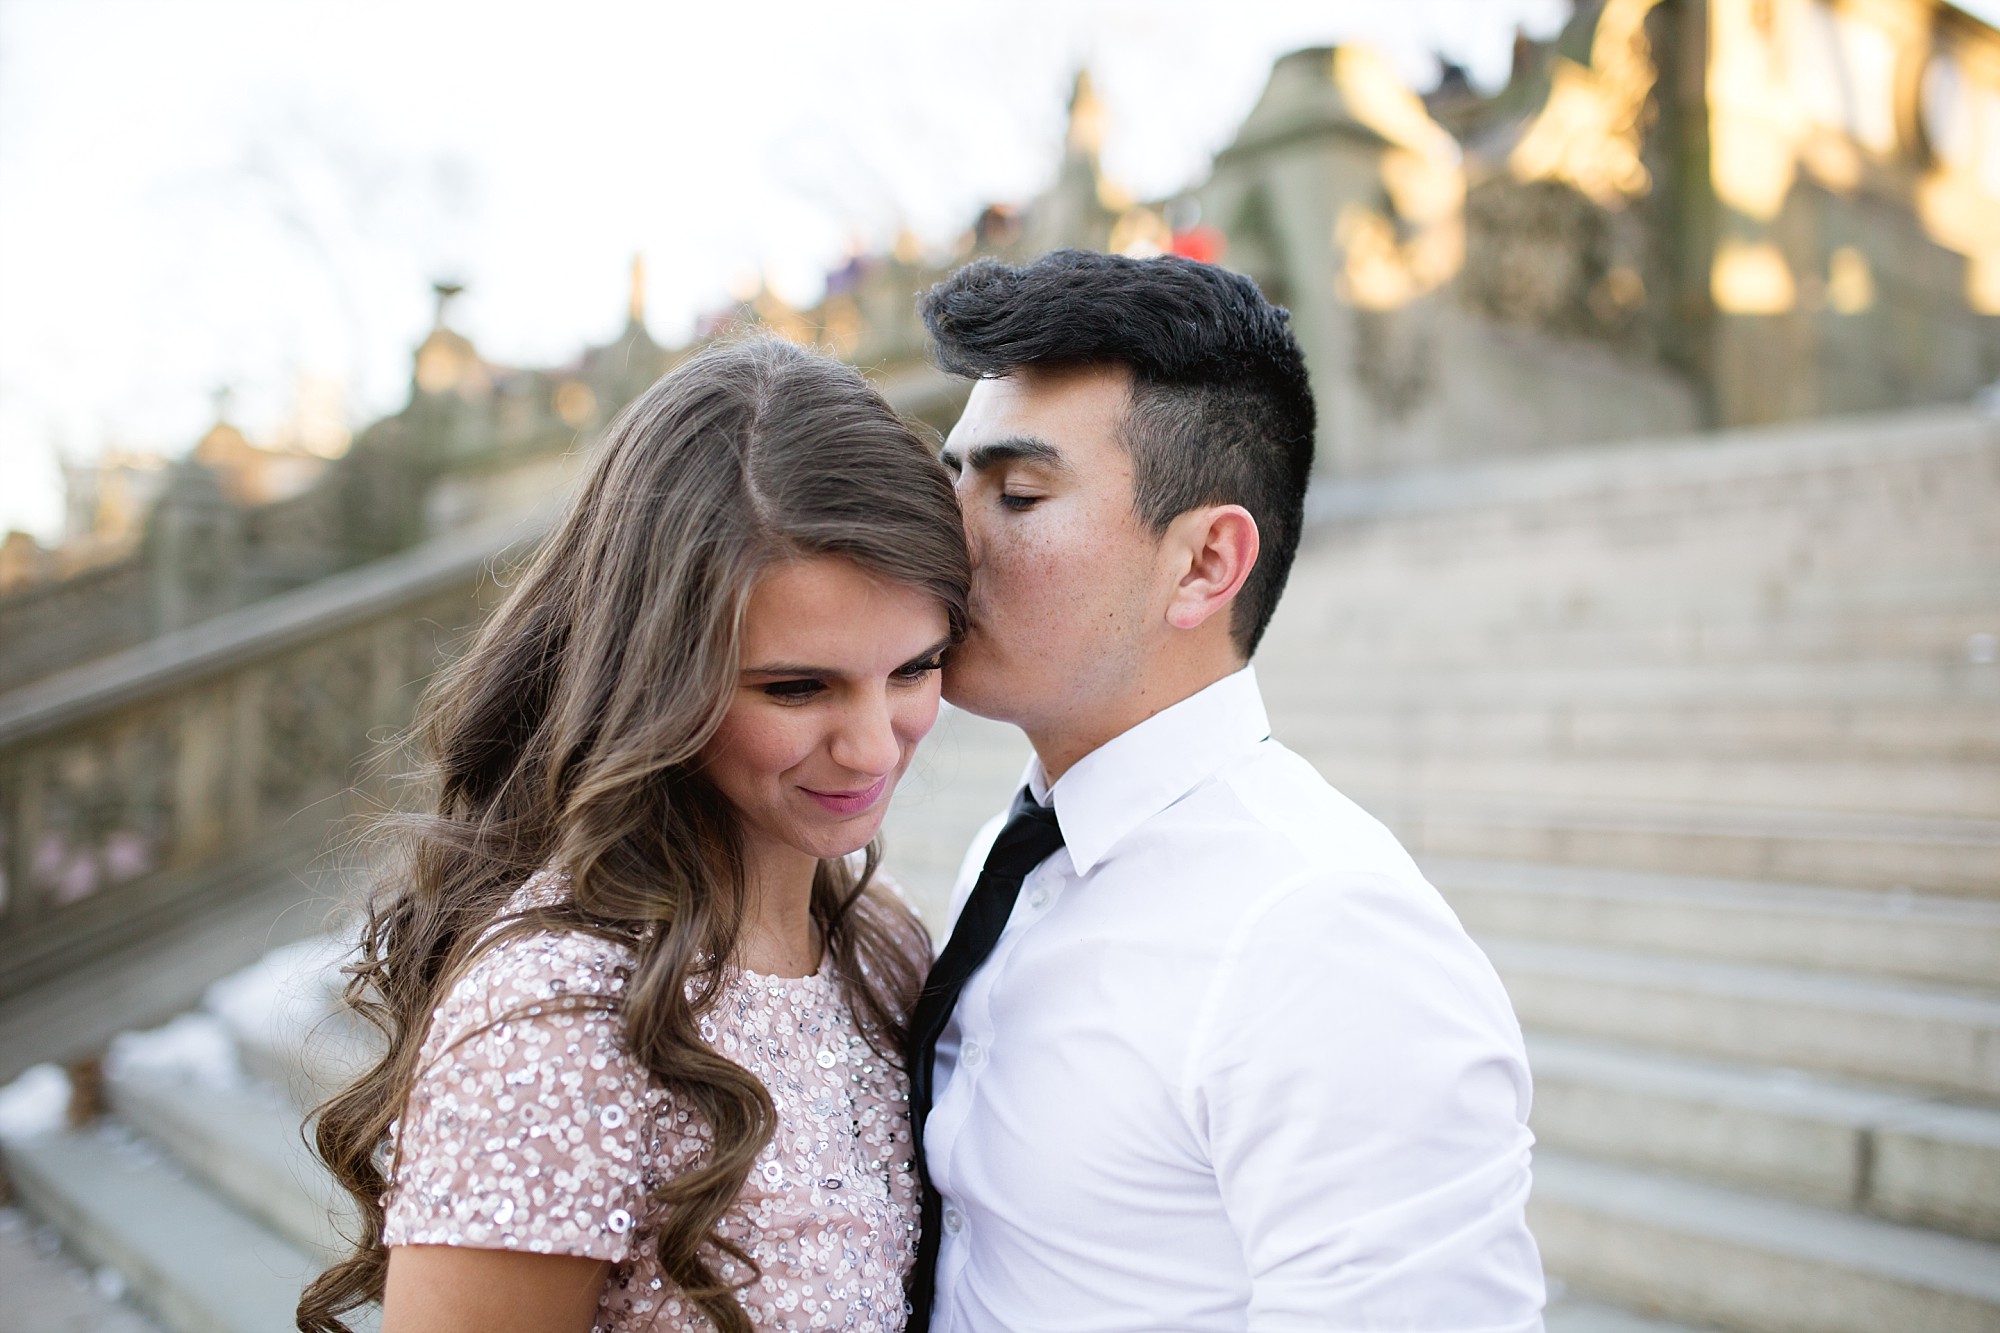 A Winter Anniversary Session in Central Park, NYC - Manhattan by Breanne Rochelle Photography.